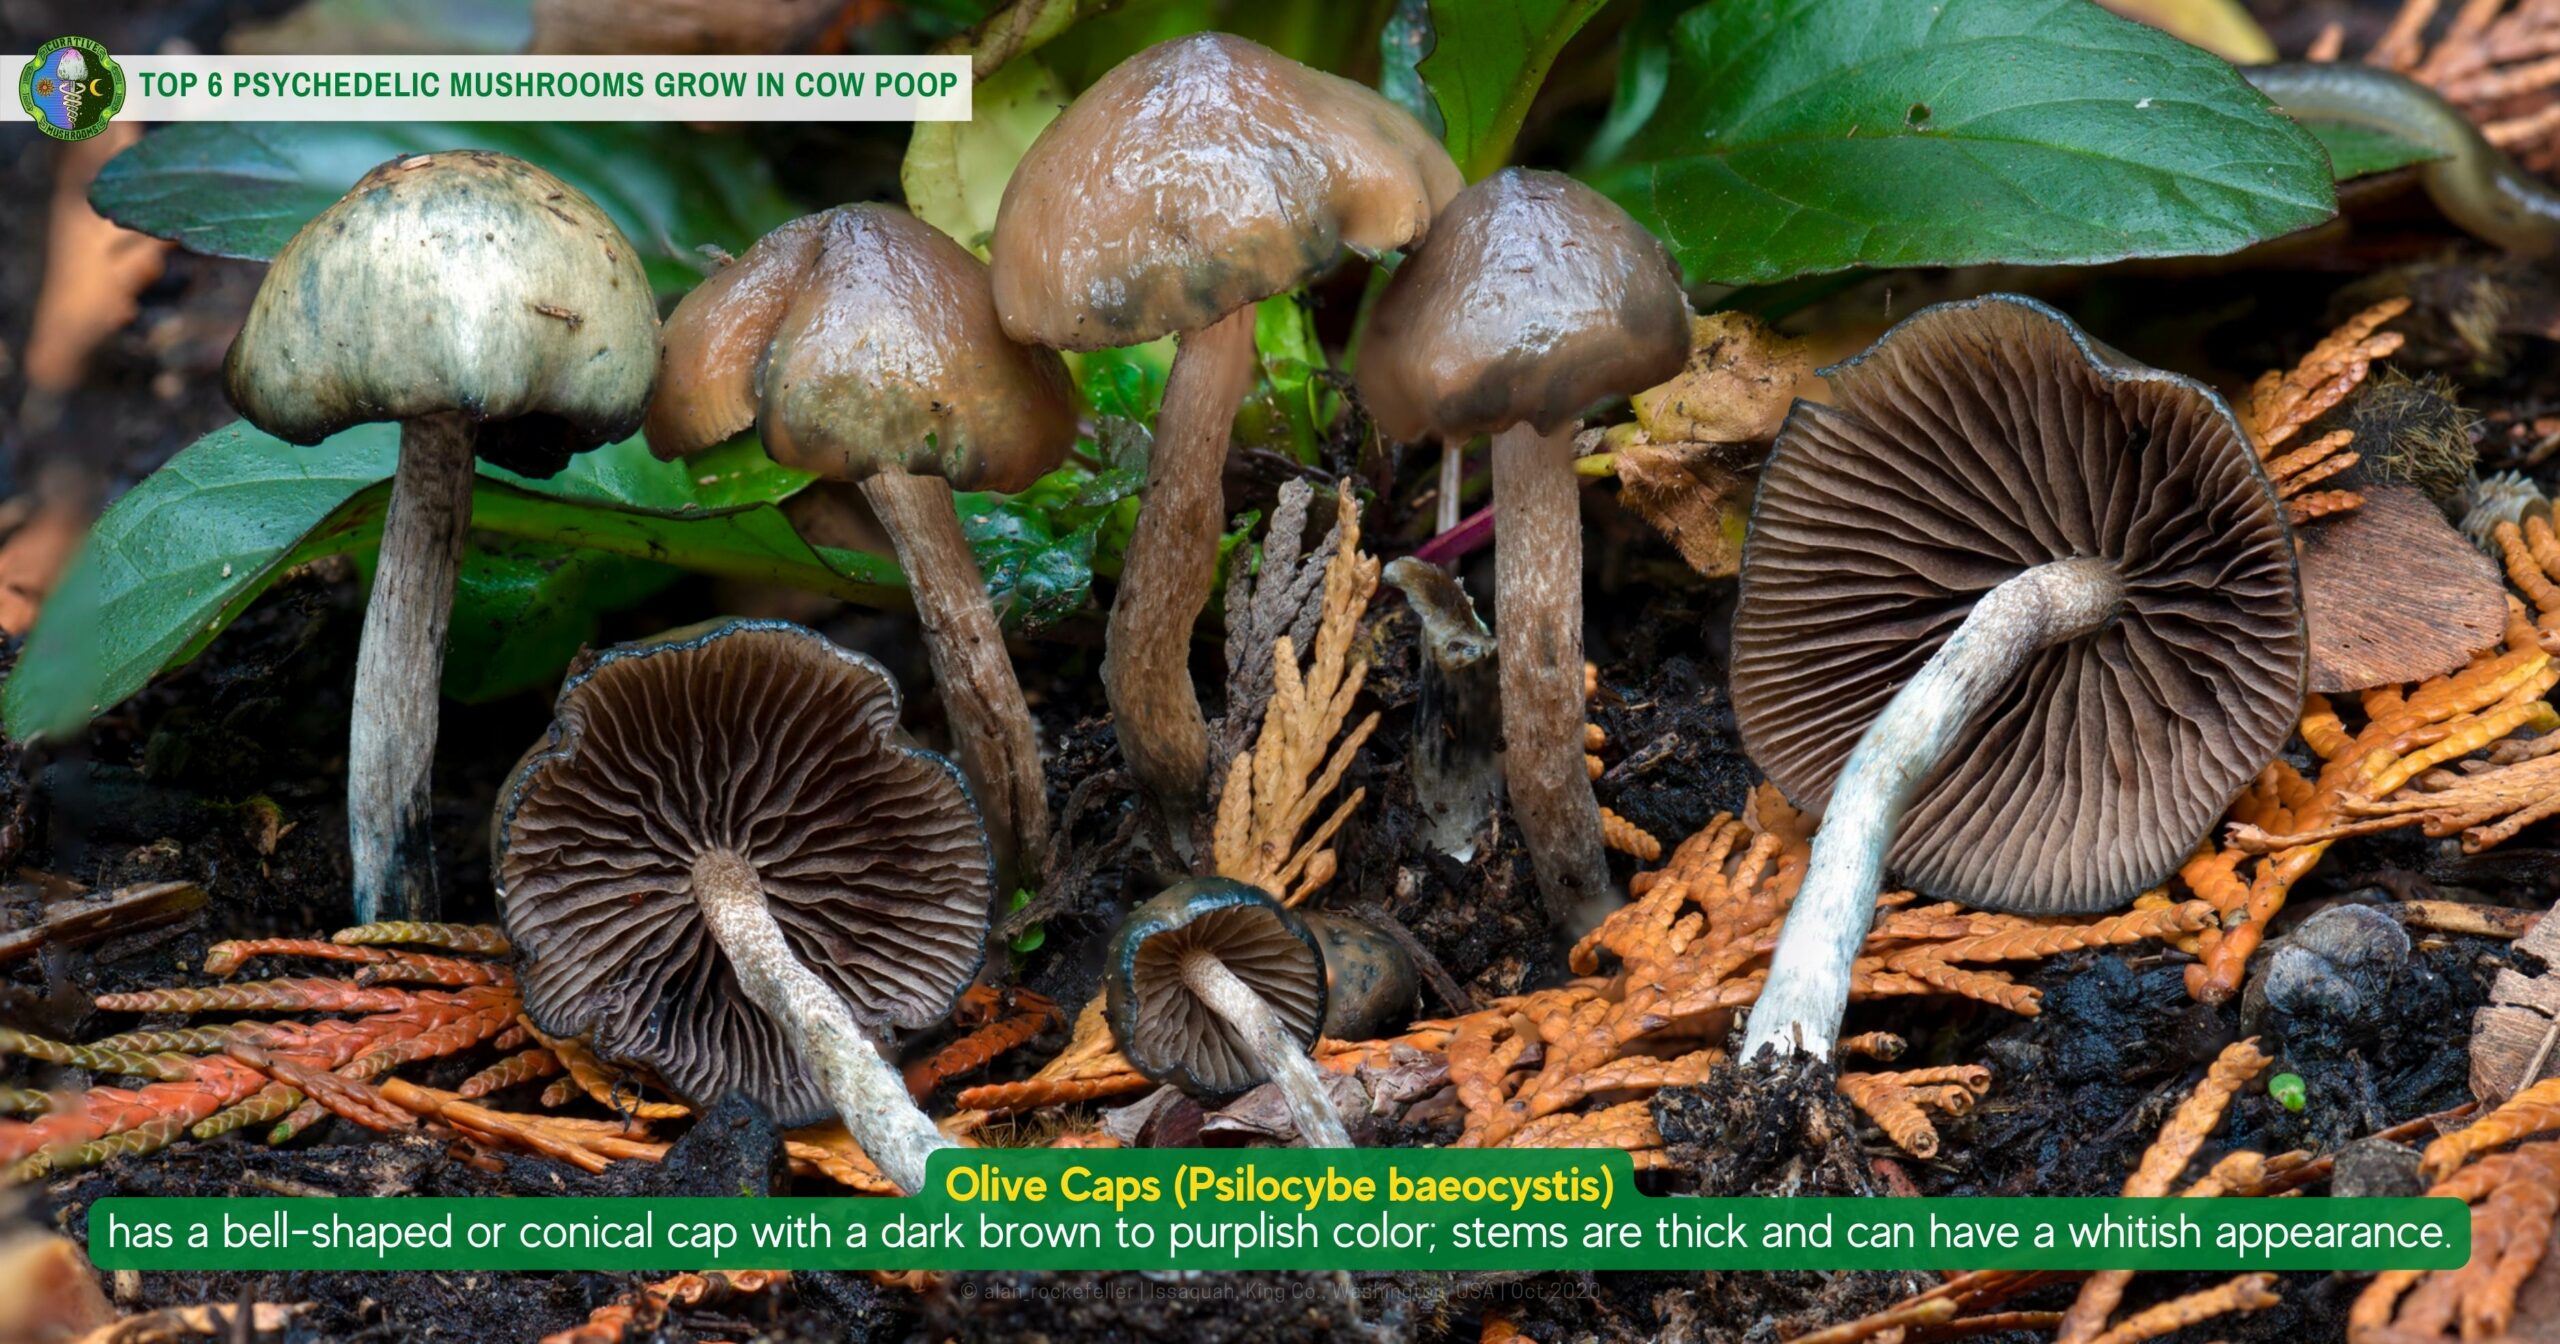 cow poop pasture mushroom - Olive Caps Psilocybe baeocystis - has a bell-shaped or conical cap with a dark brown to purplish color, stems are thick and can have a whitish appearance